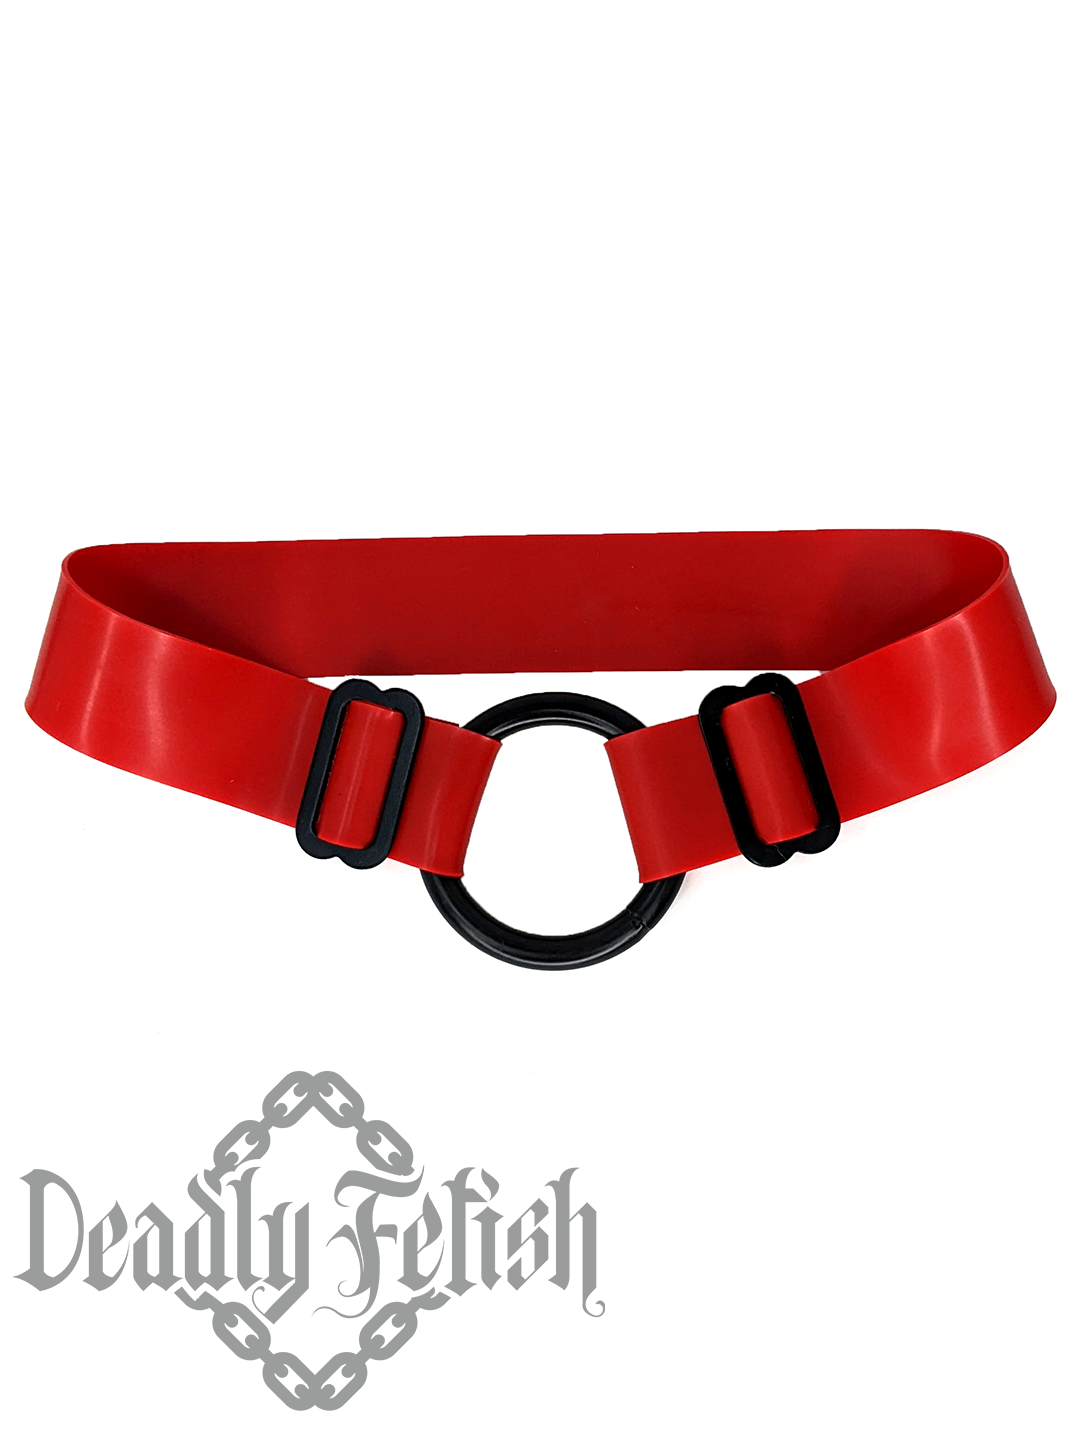 Deadly Fetish Latex: Multi-Use Straps